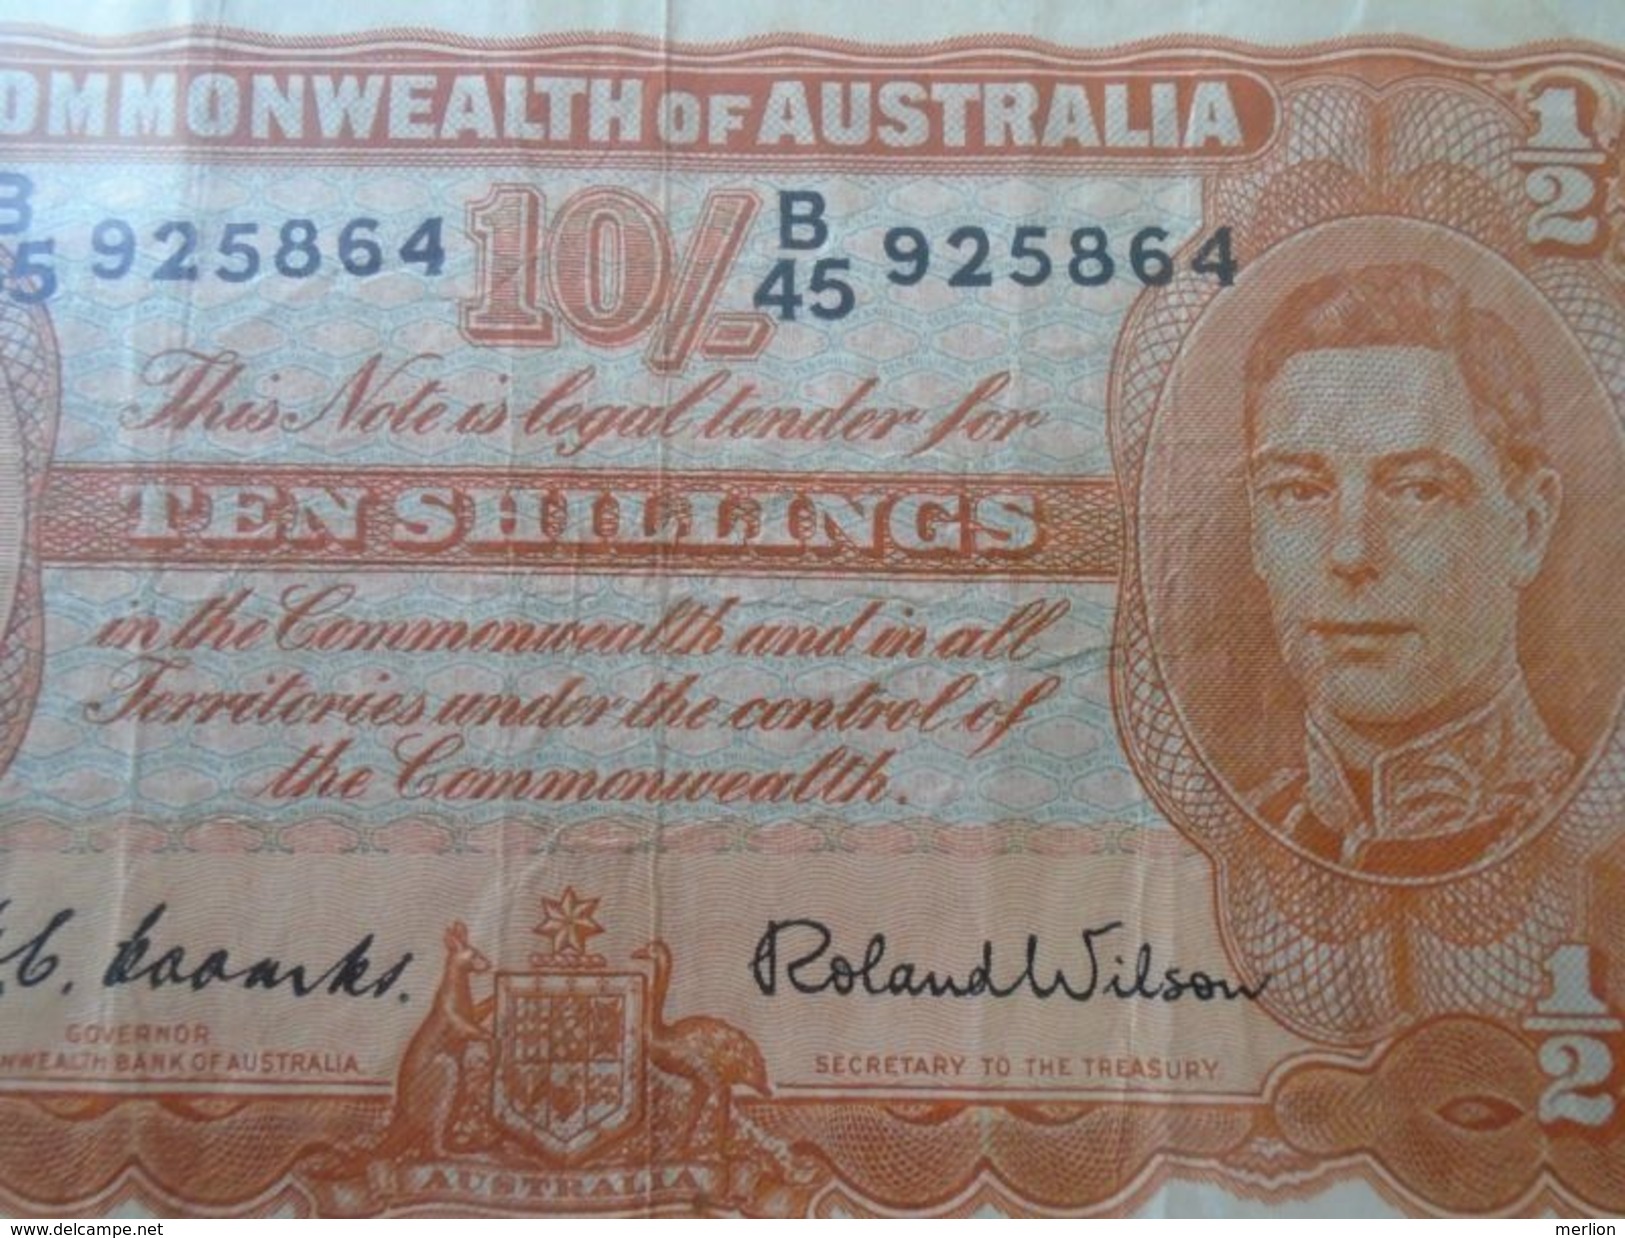 DEL001.8   AUSTRALIA - 10 Shillings - Nd (1952) - P 25.d - Sign.H.C.Coombs And Roland Wilson - George VI -Commonwealth - 1938-52